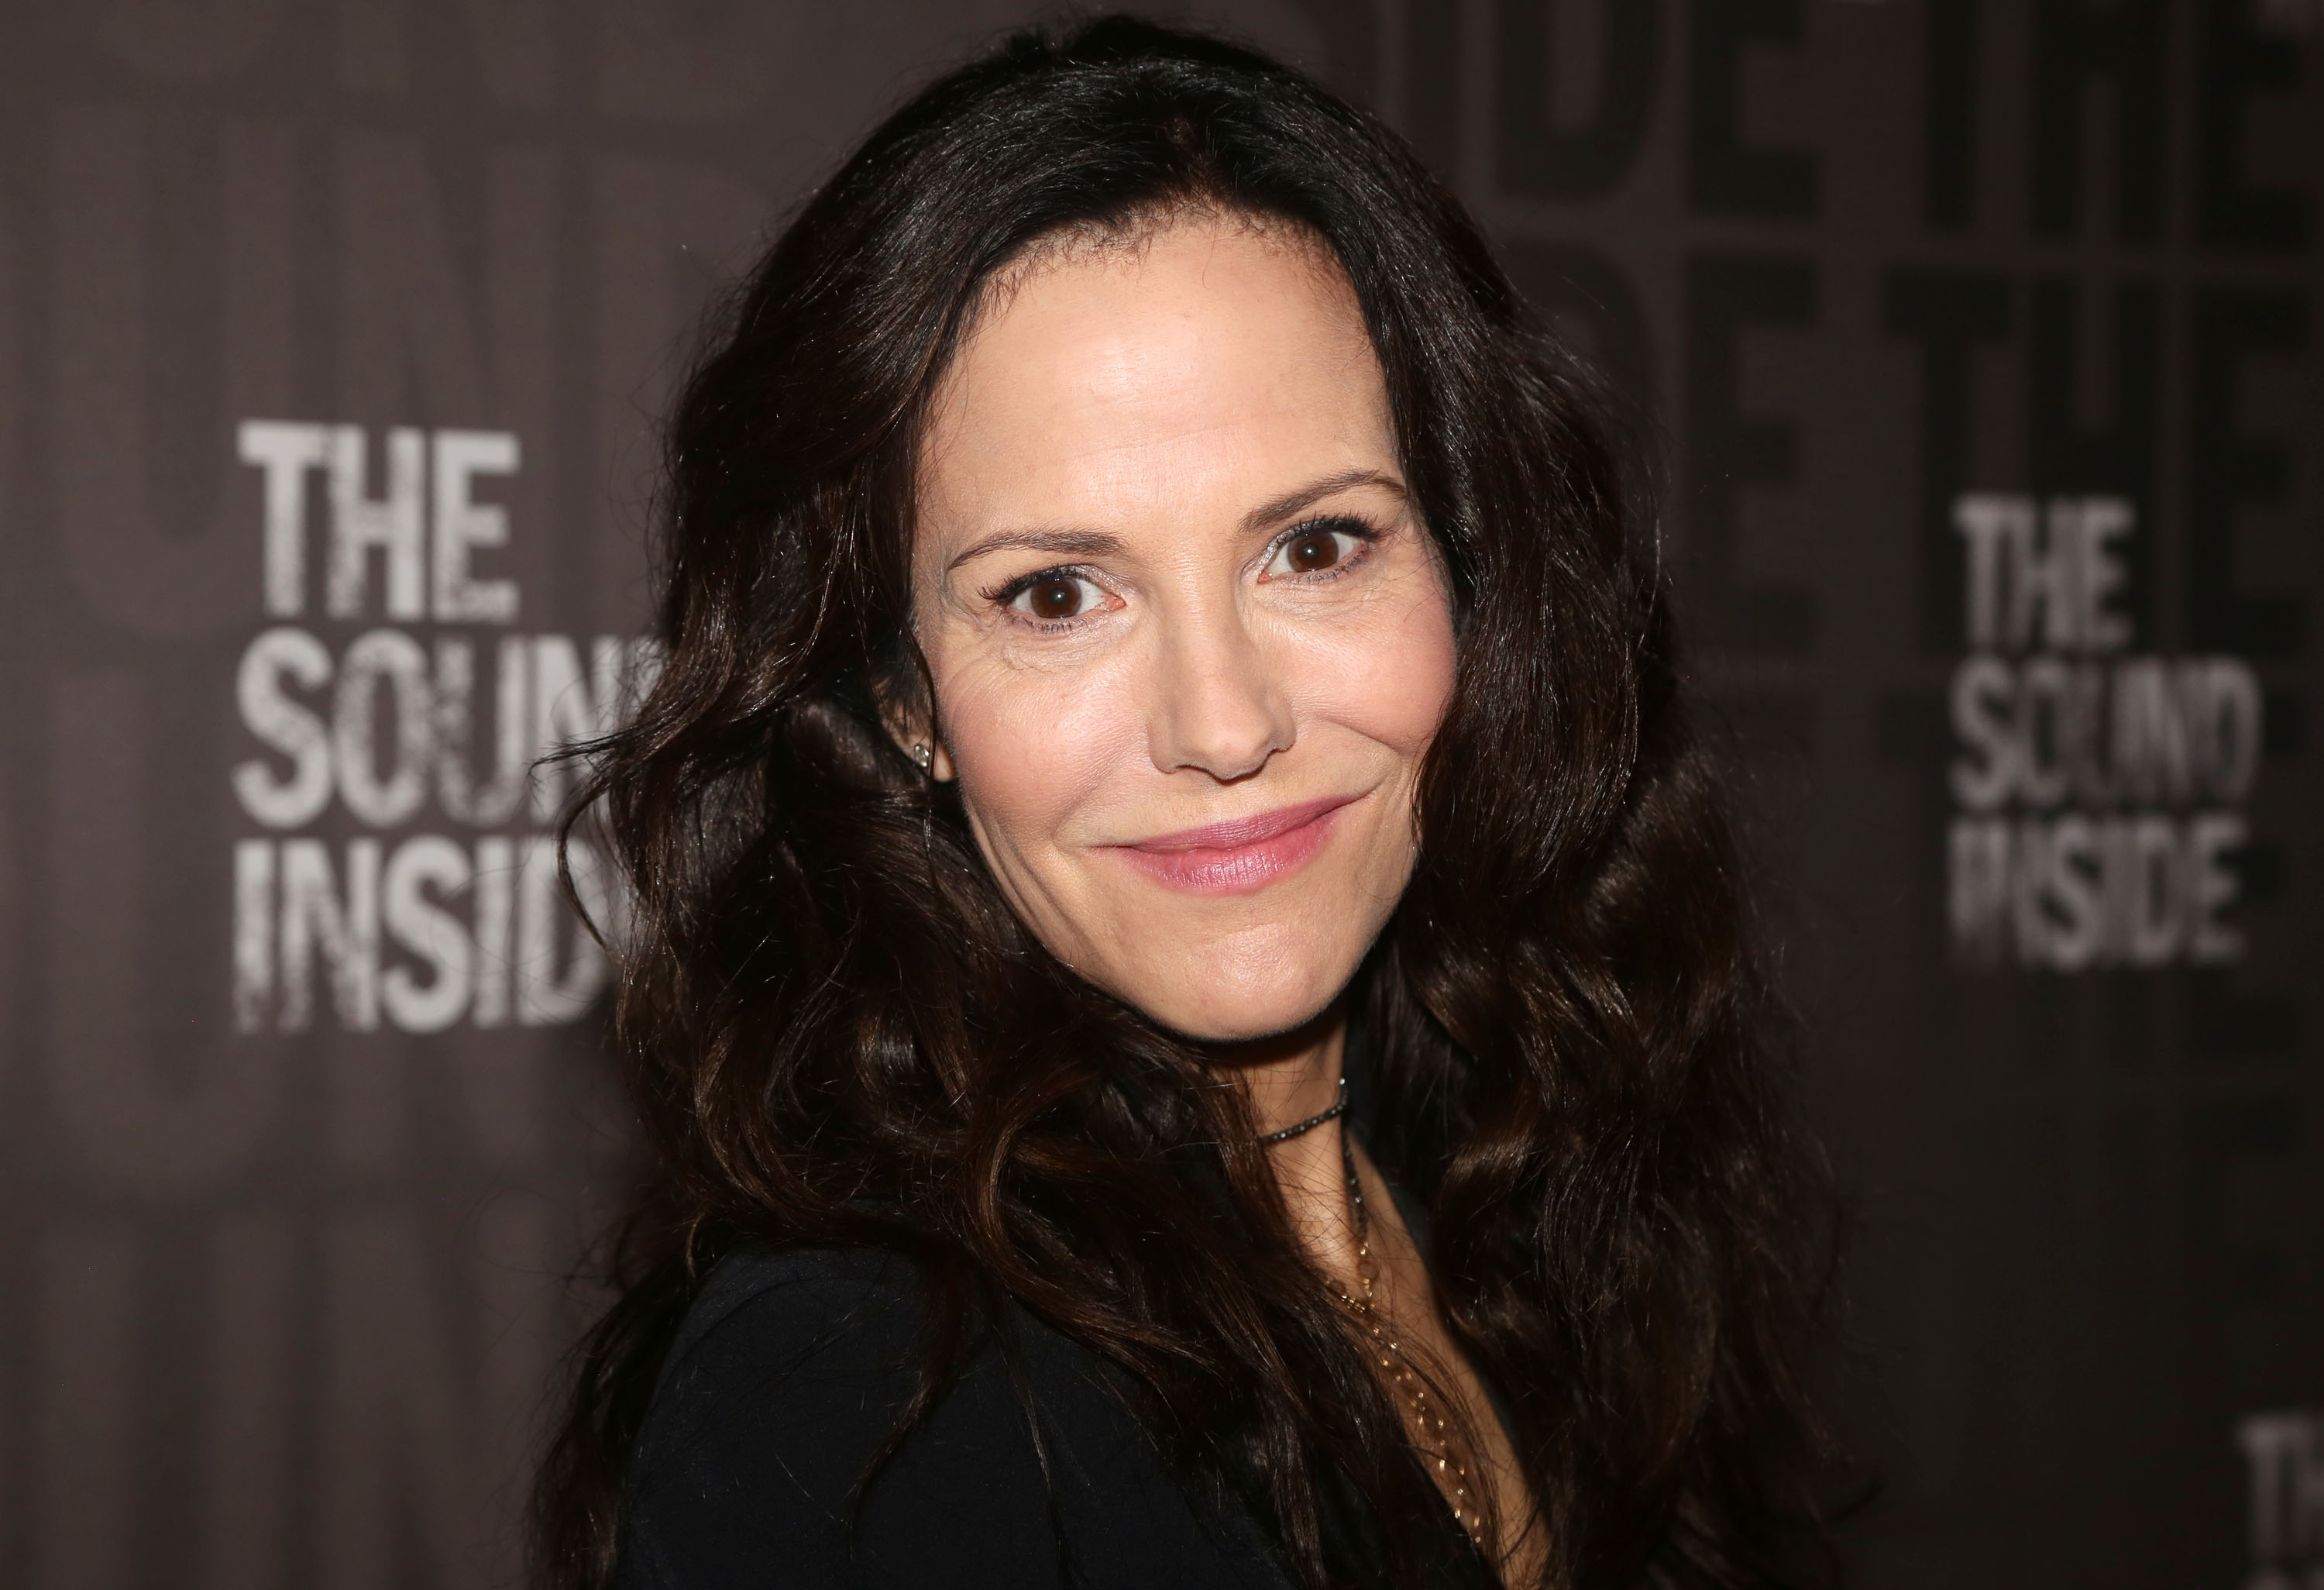 Mary-Louise Parker poses at the opening night of the new play "The Sound Inside" on Broadway at Studio 54 Theatre on October 17, 2019 in New York City. (